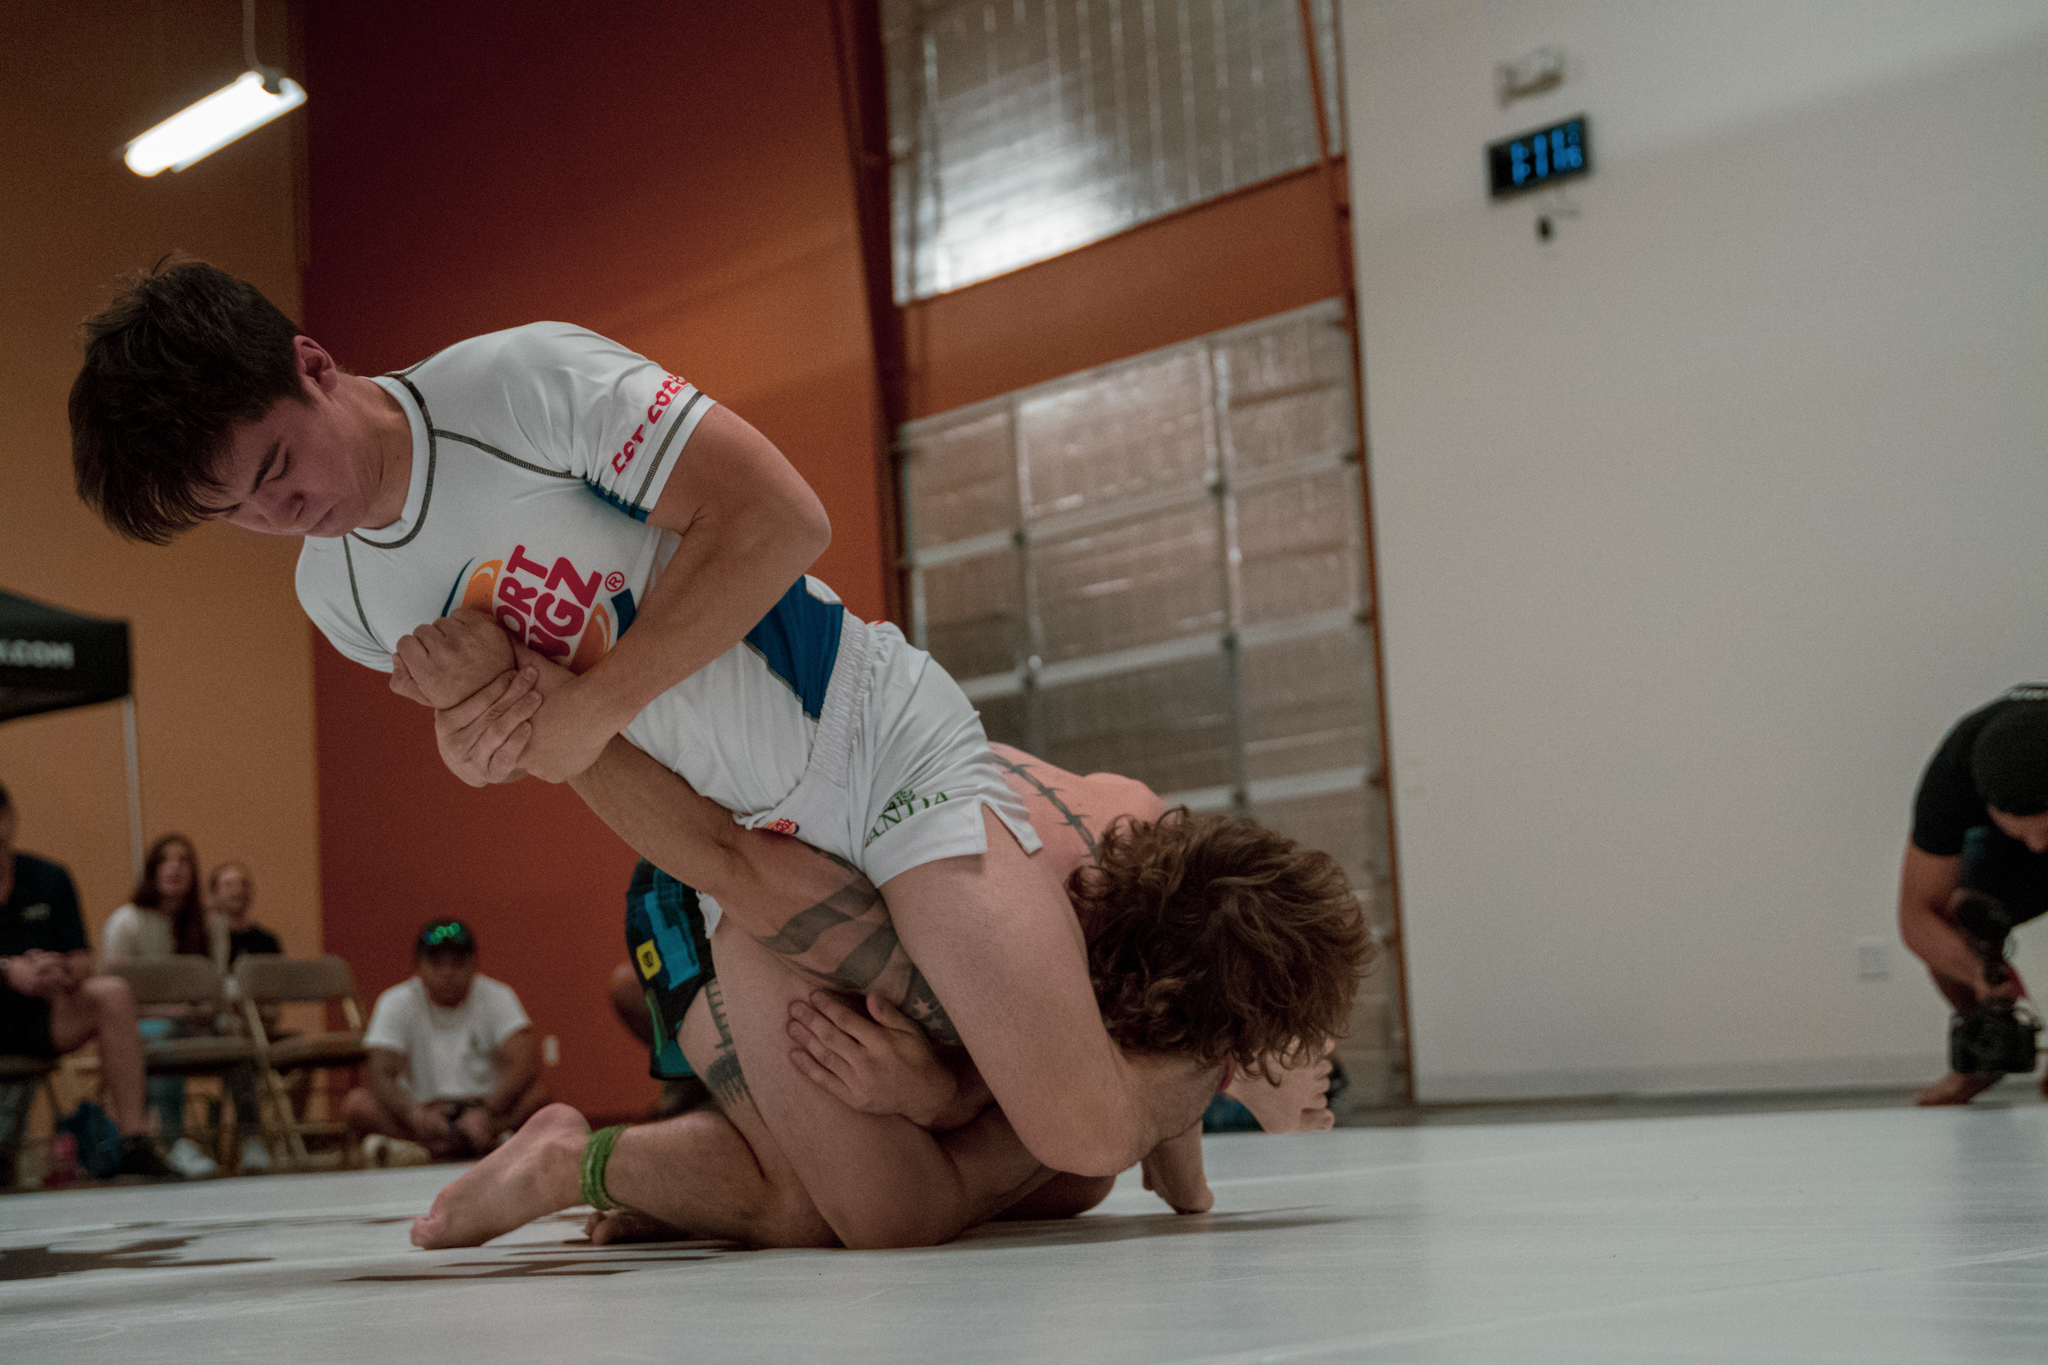 flying armbar attempted and successful in a competition